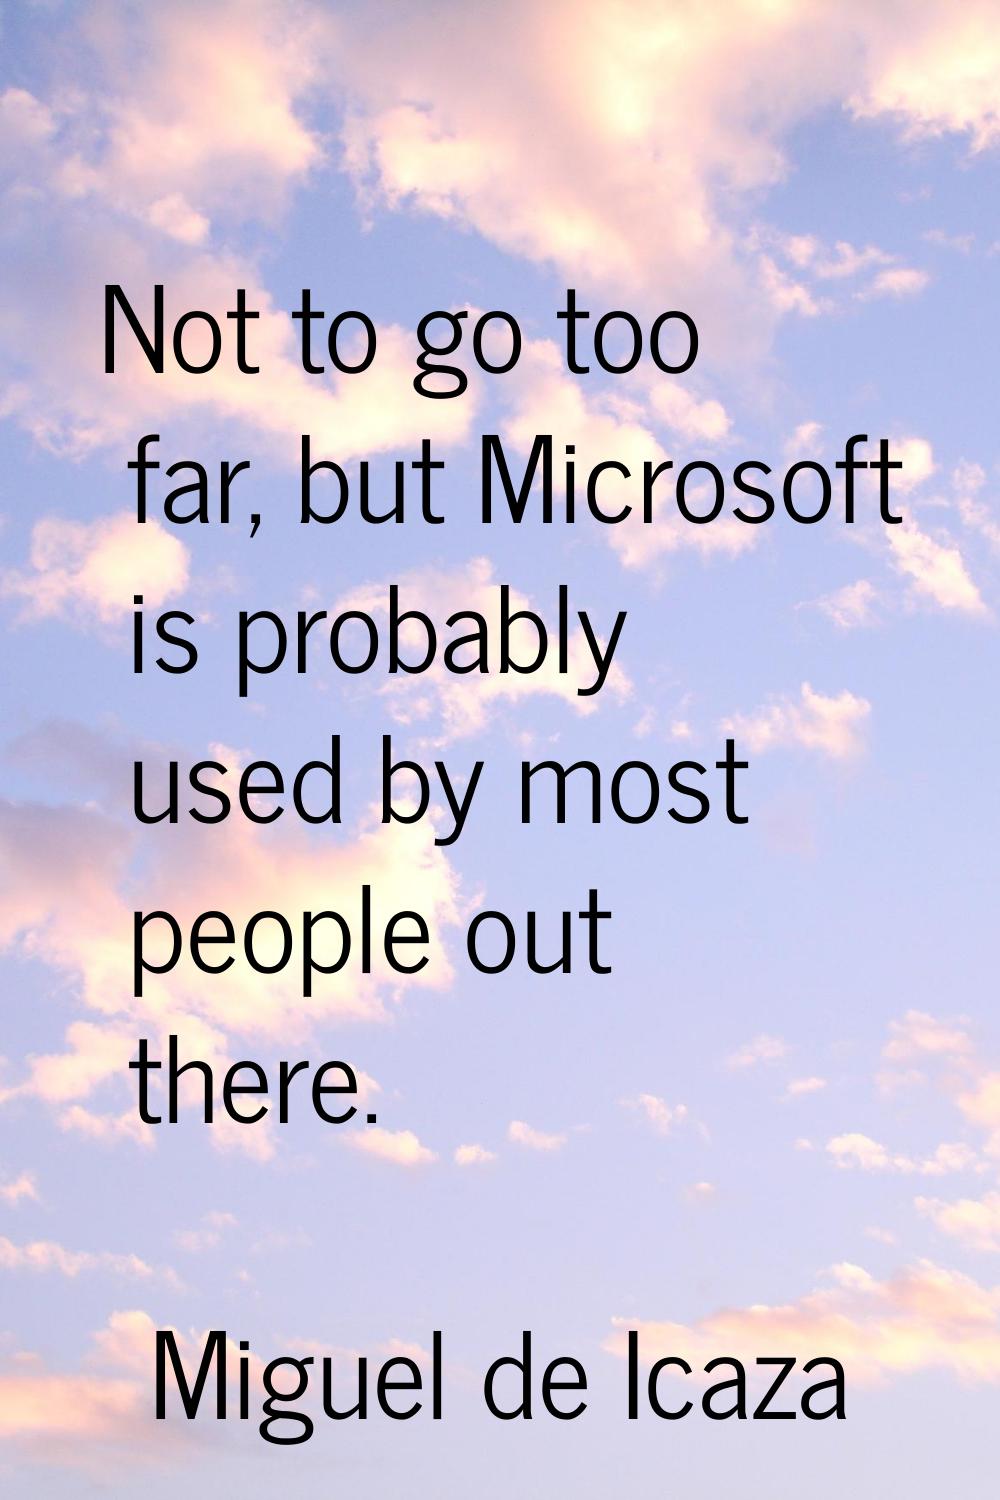 Not to go too far, but Microsoft is probably used by most people out there.